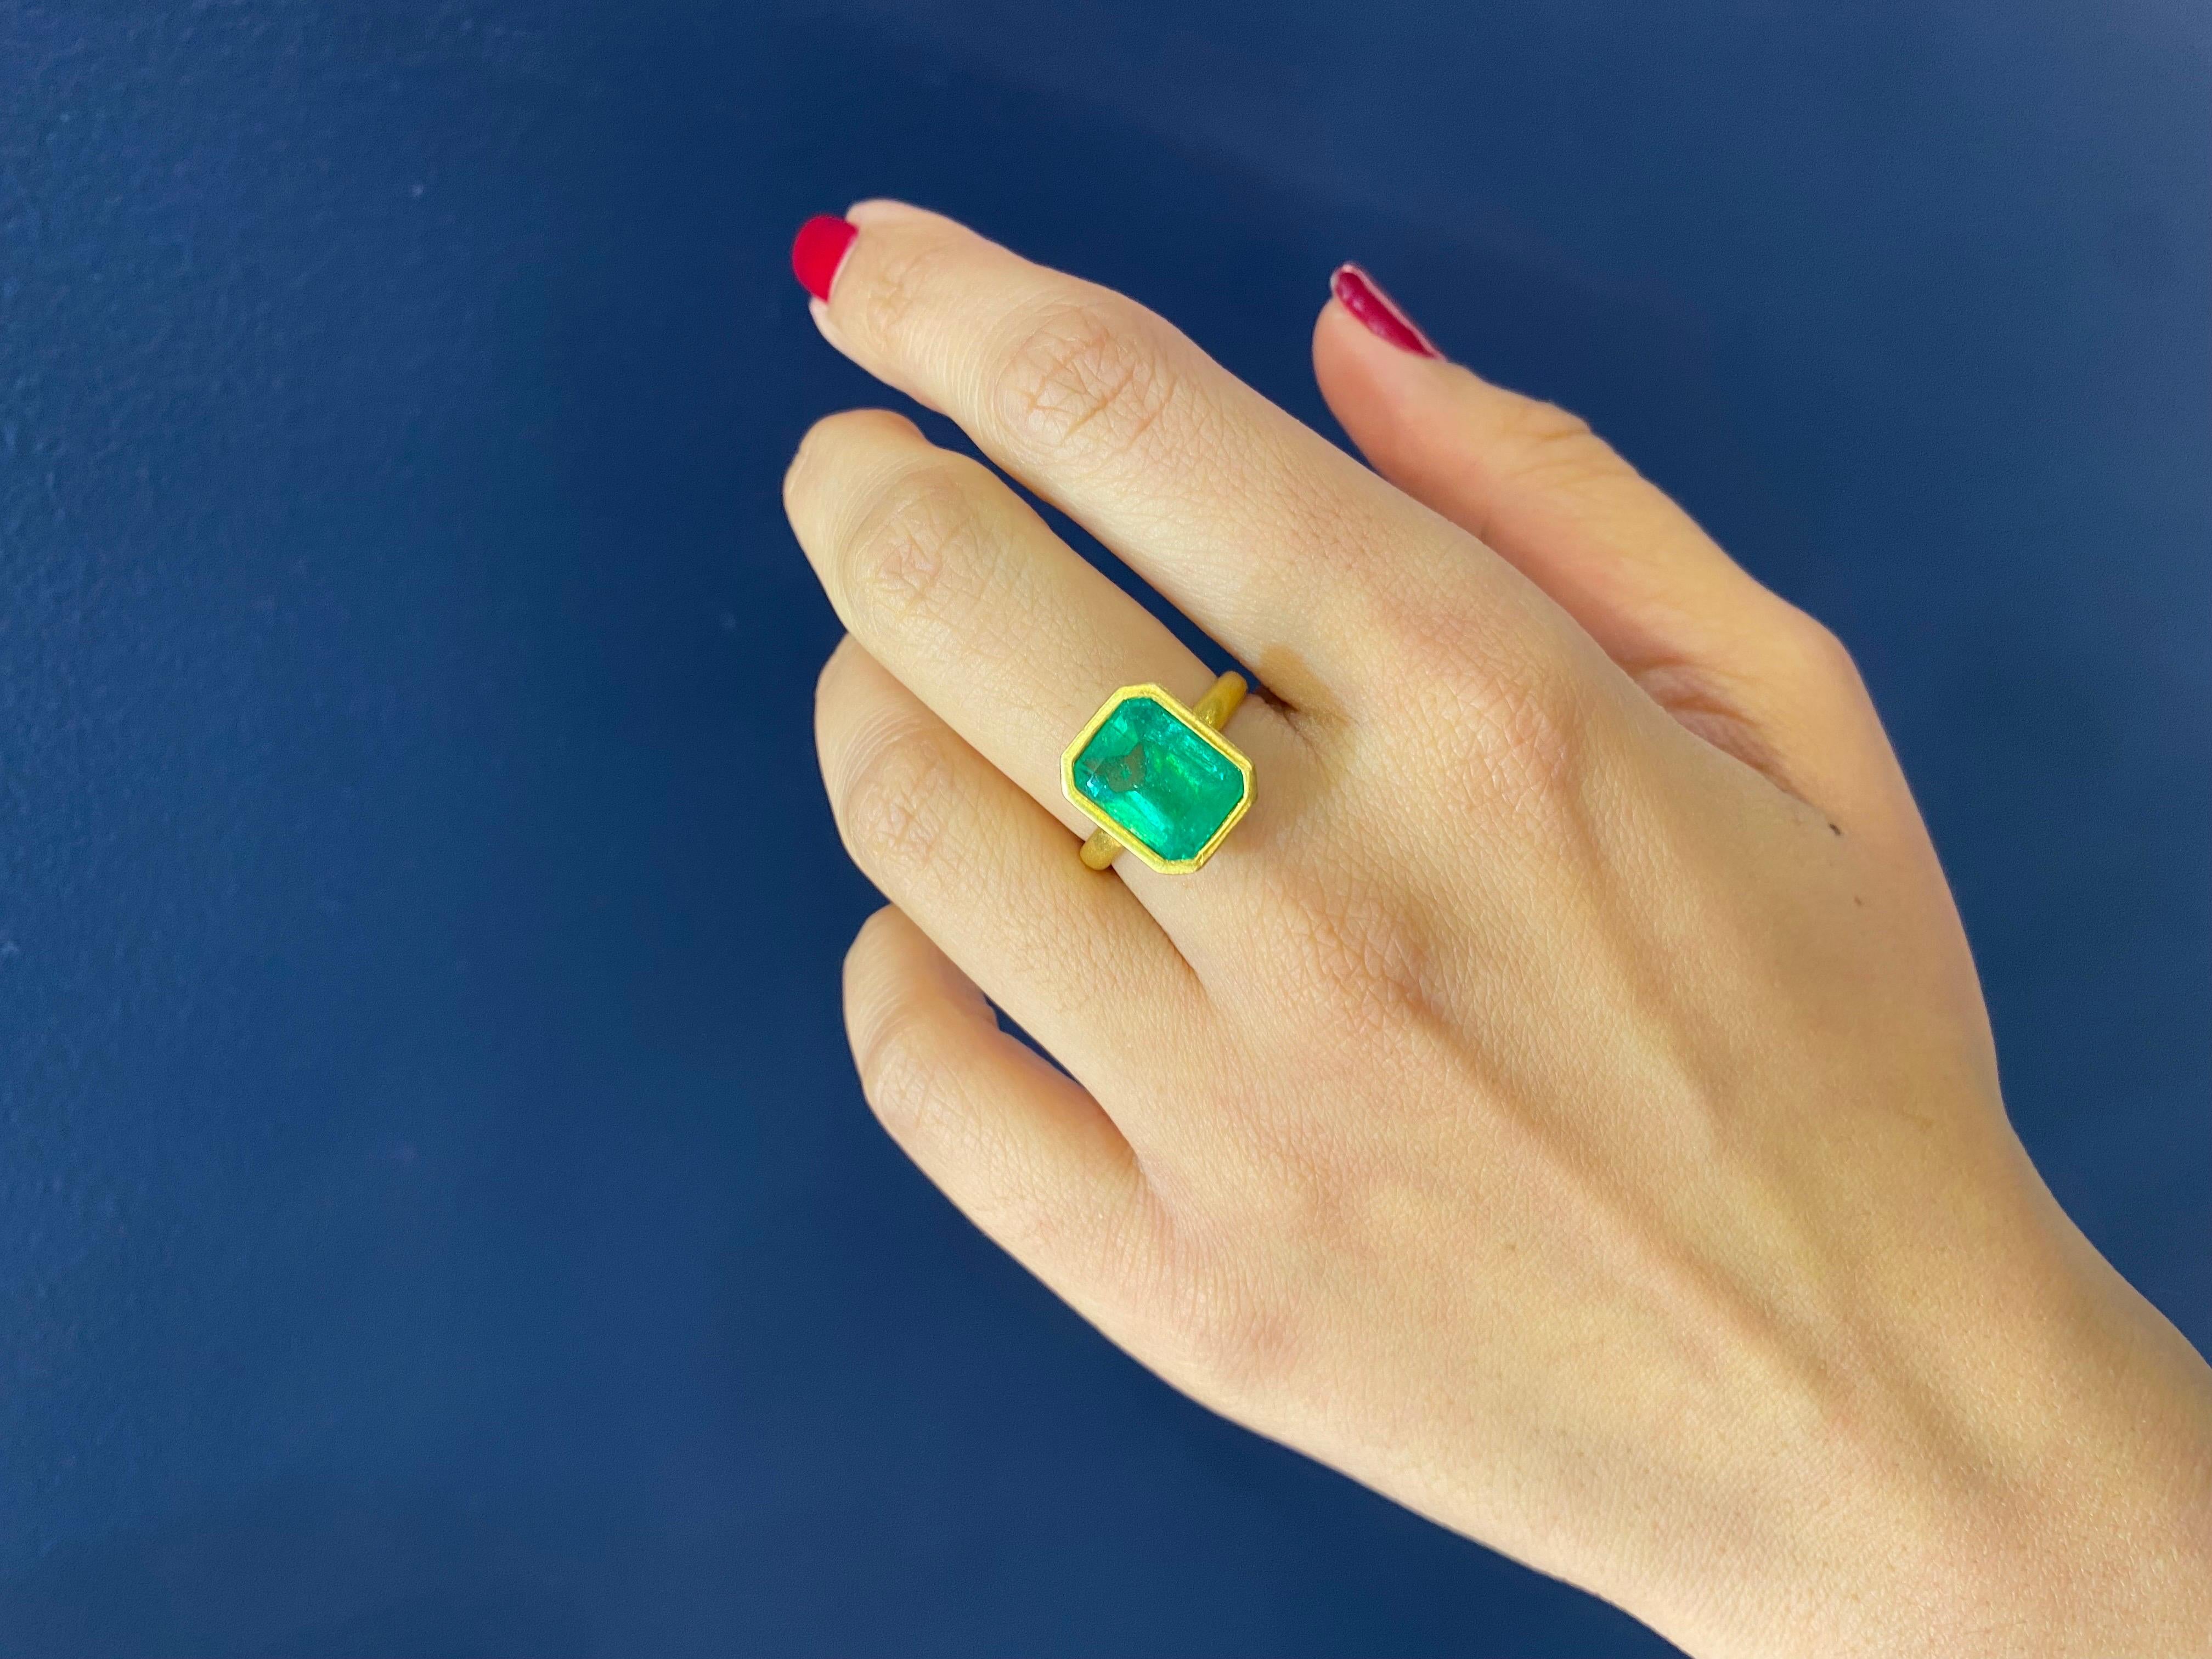 A simple, elegant 4.30 Carat Colombian Emerald ring, bezel set in 18K Yellow Gold. The gold is matte finished, which gives it a very unique look. The Emerald has a beautiful vivid green color and a great luster to it. Currently sized at US6, can be